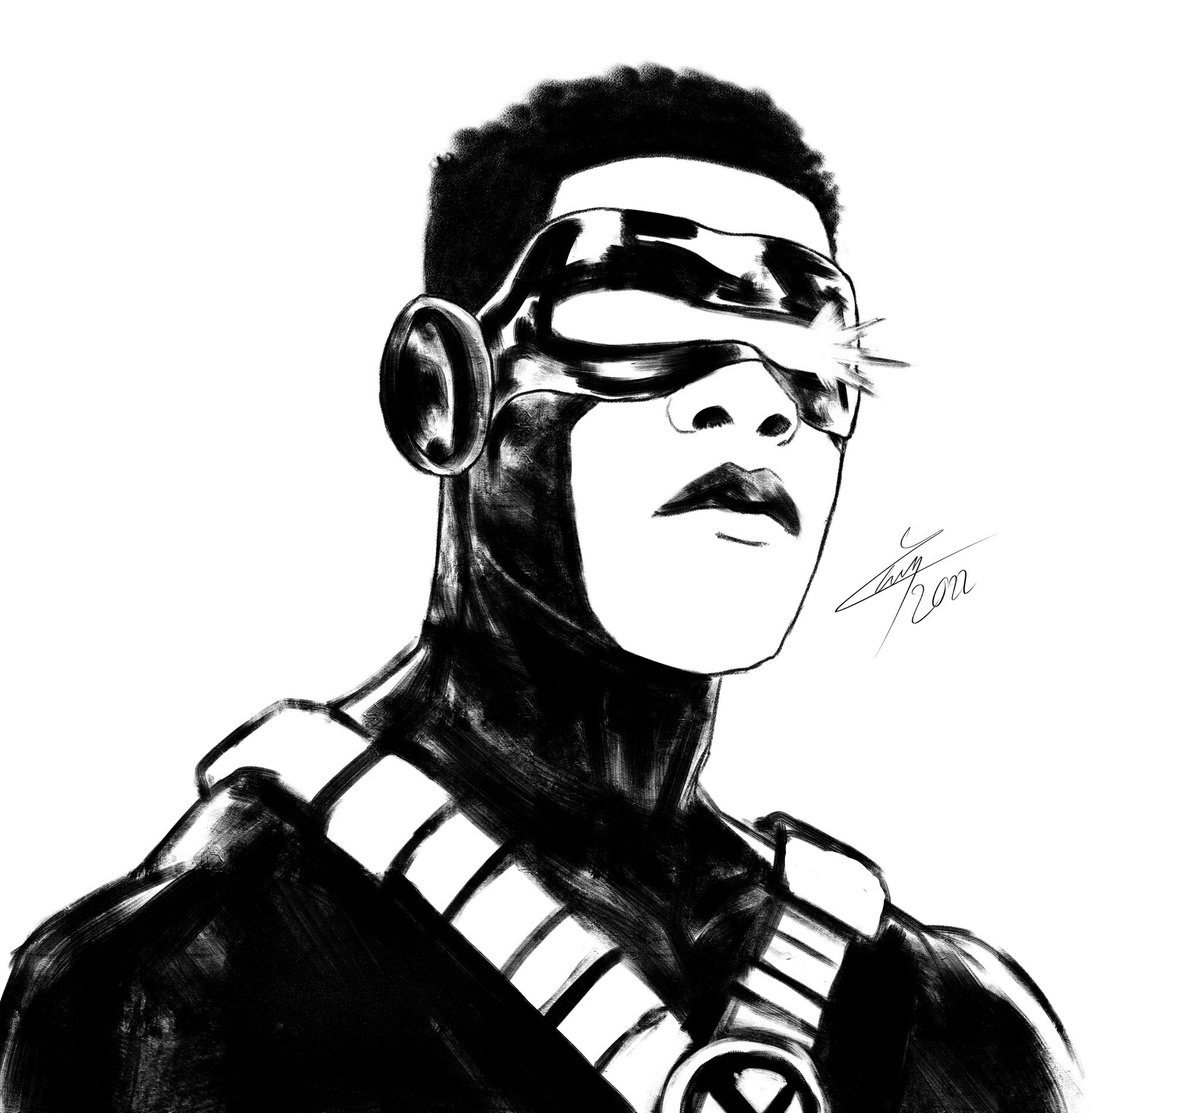 I didn’t do anything for Blacktober this year but I had a urge this morning, so here’s a Cyclops^^